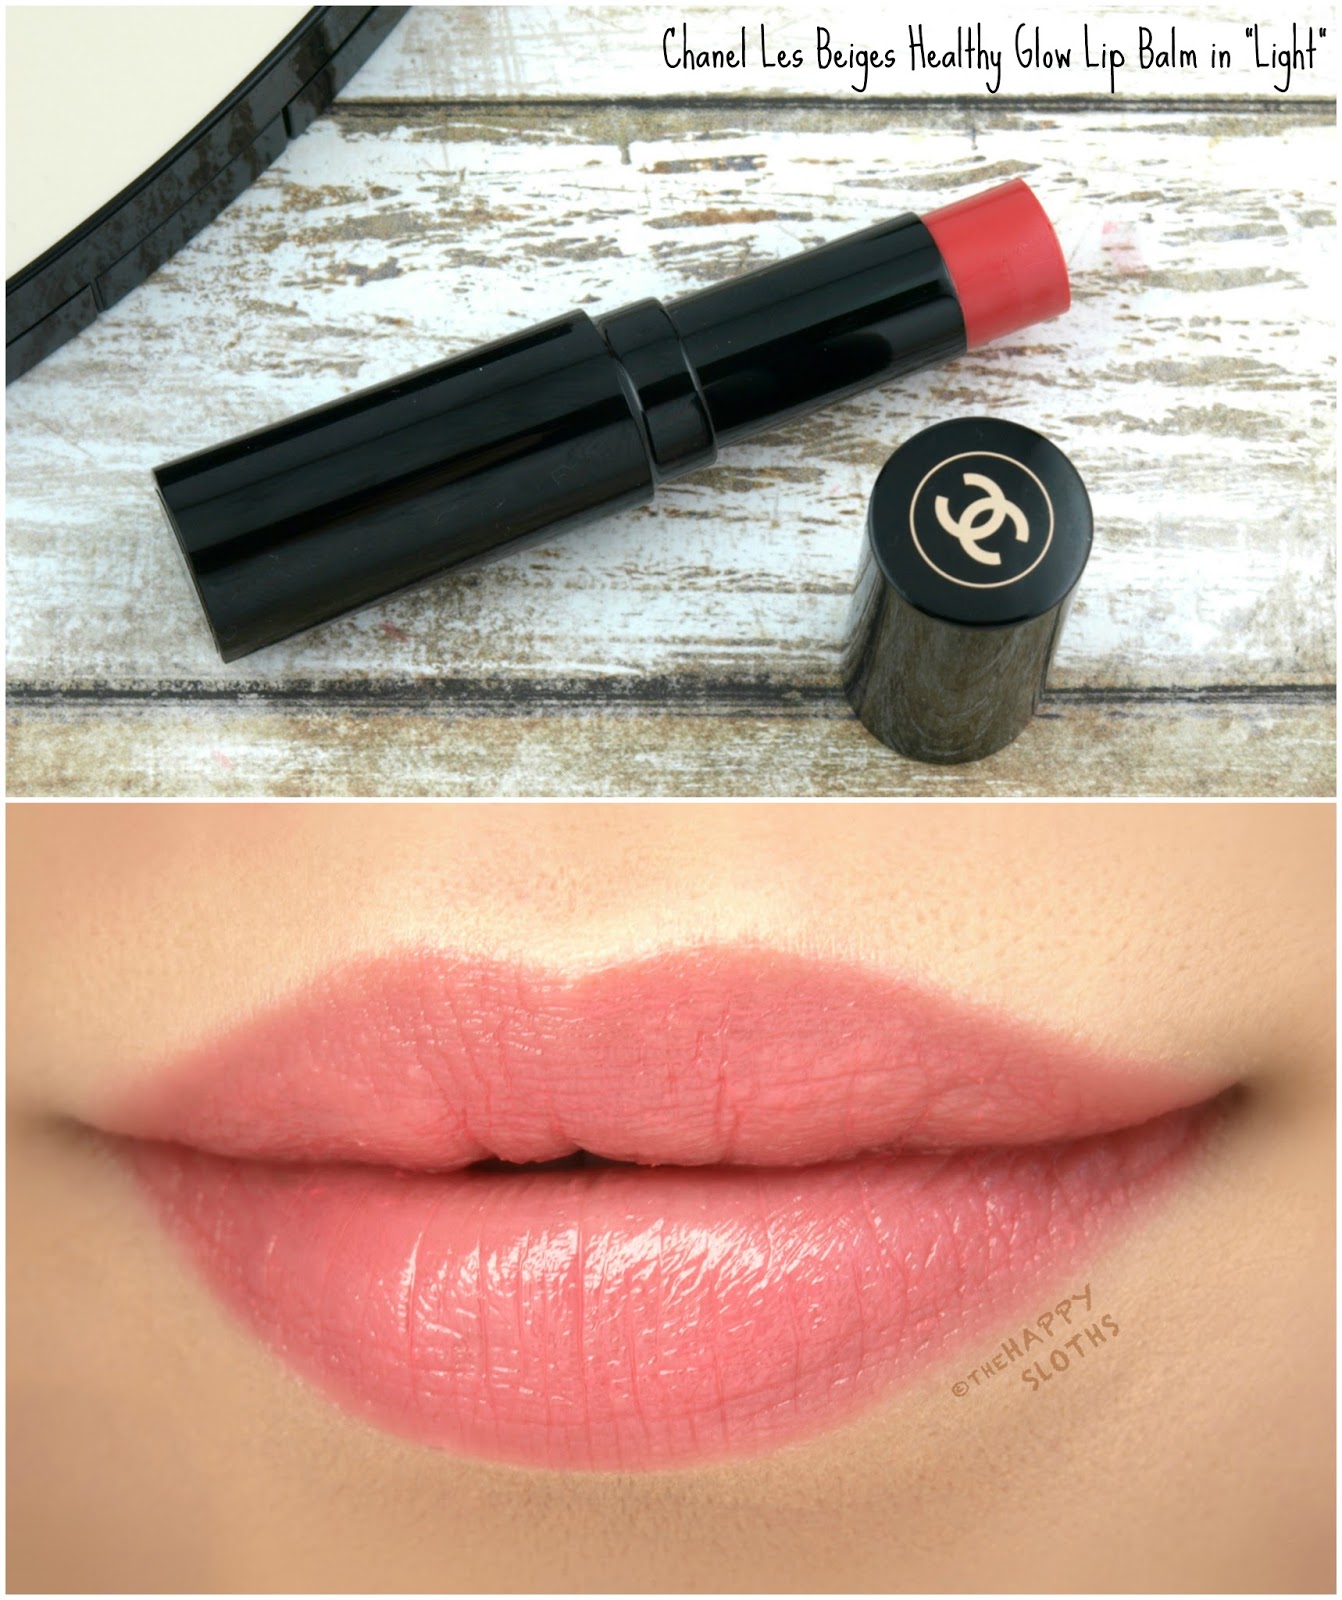 Chanel Les Beiges Healthy Glow Lip Balm in "Light": Review and Swatches